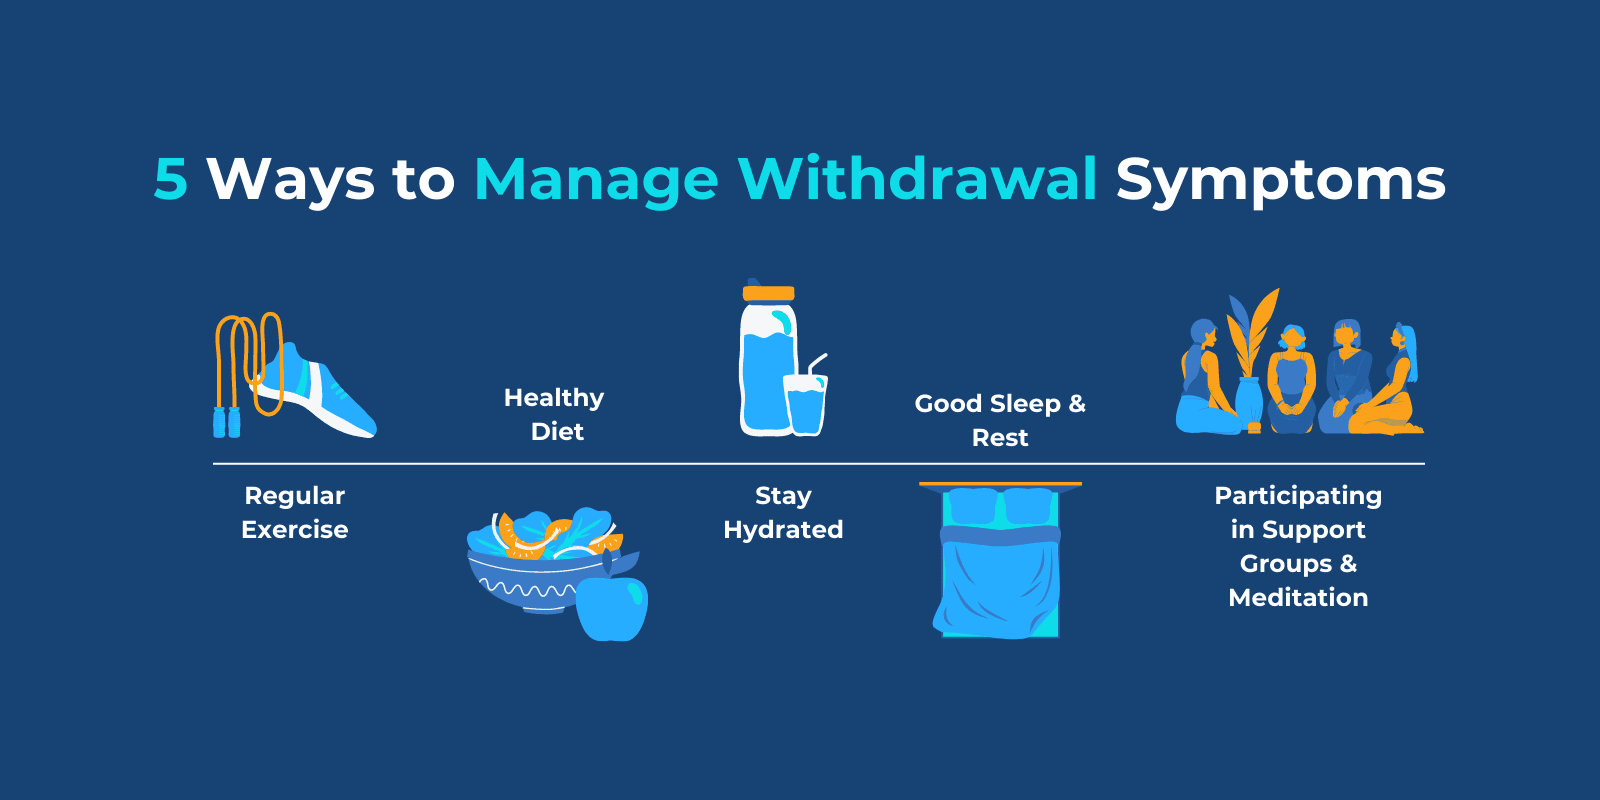 5 ways to manage withdrawal symptoms with relevant icons like jumping ropes, a salad, a water bottle, a bed, and a group meditation session